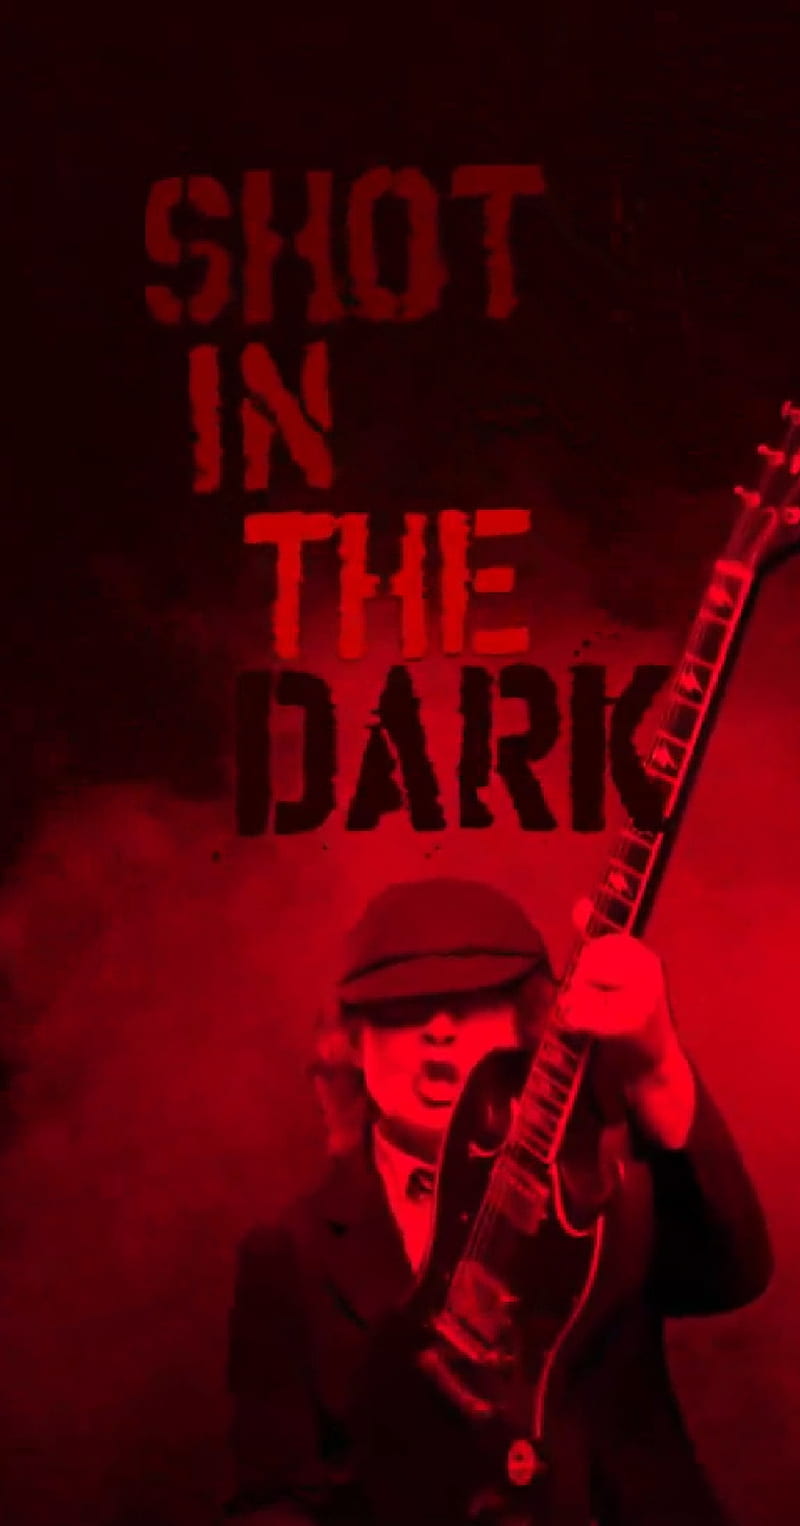 Shot In the darkACDC, ac dc, angus young, shot in the dark, HD phone wallpaper